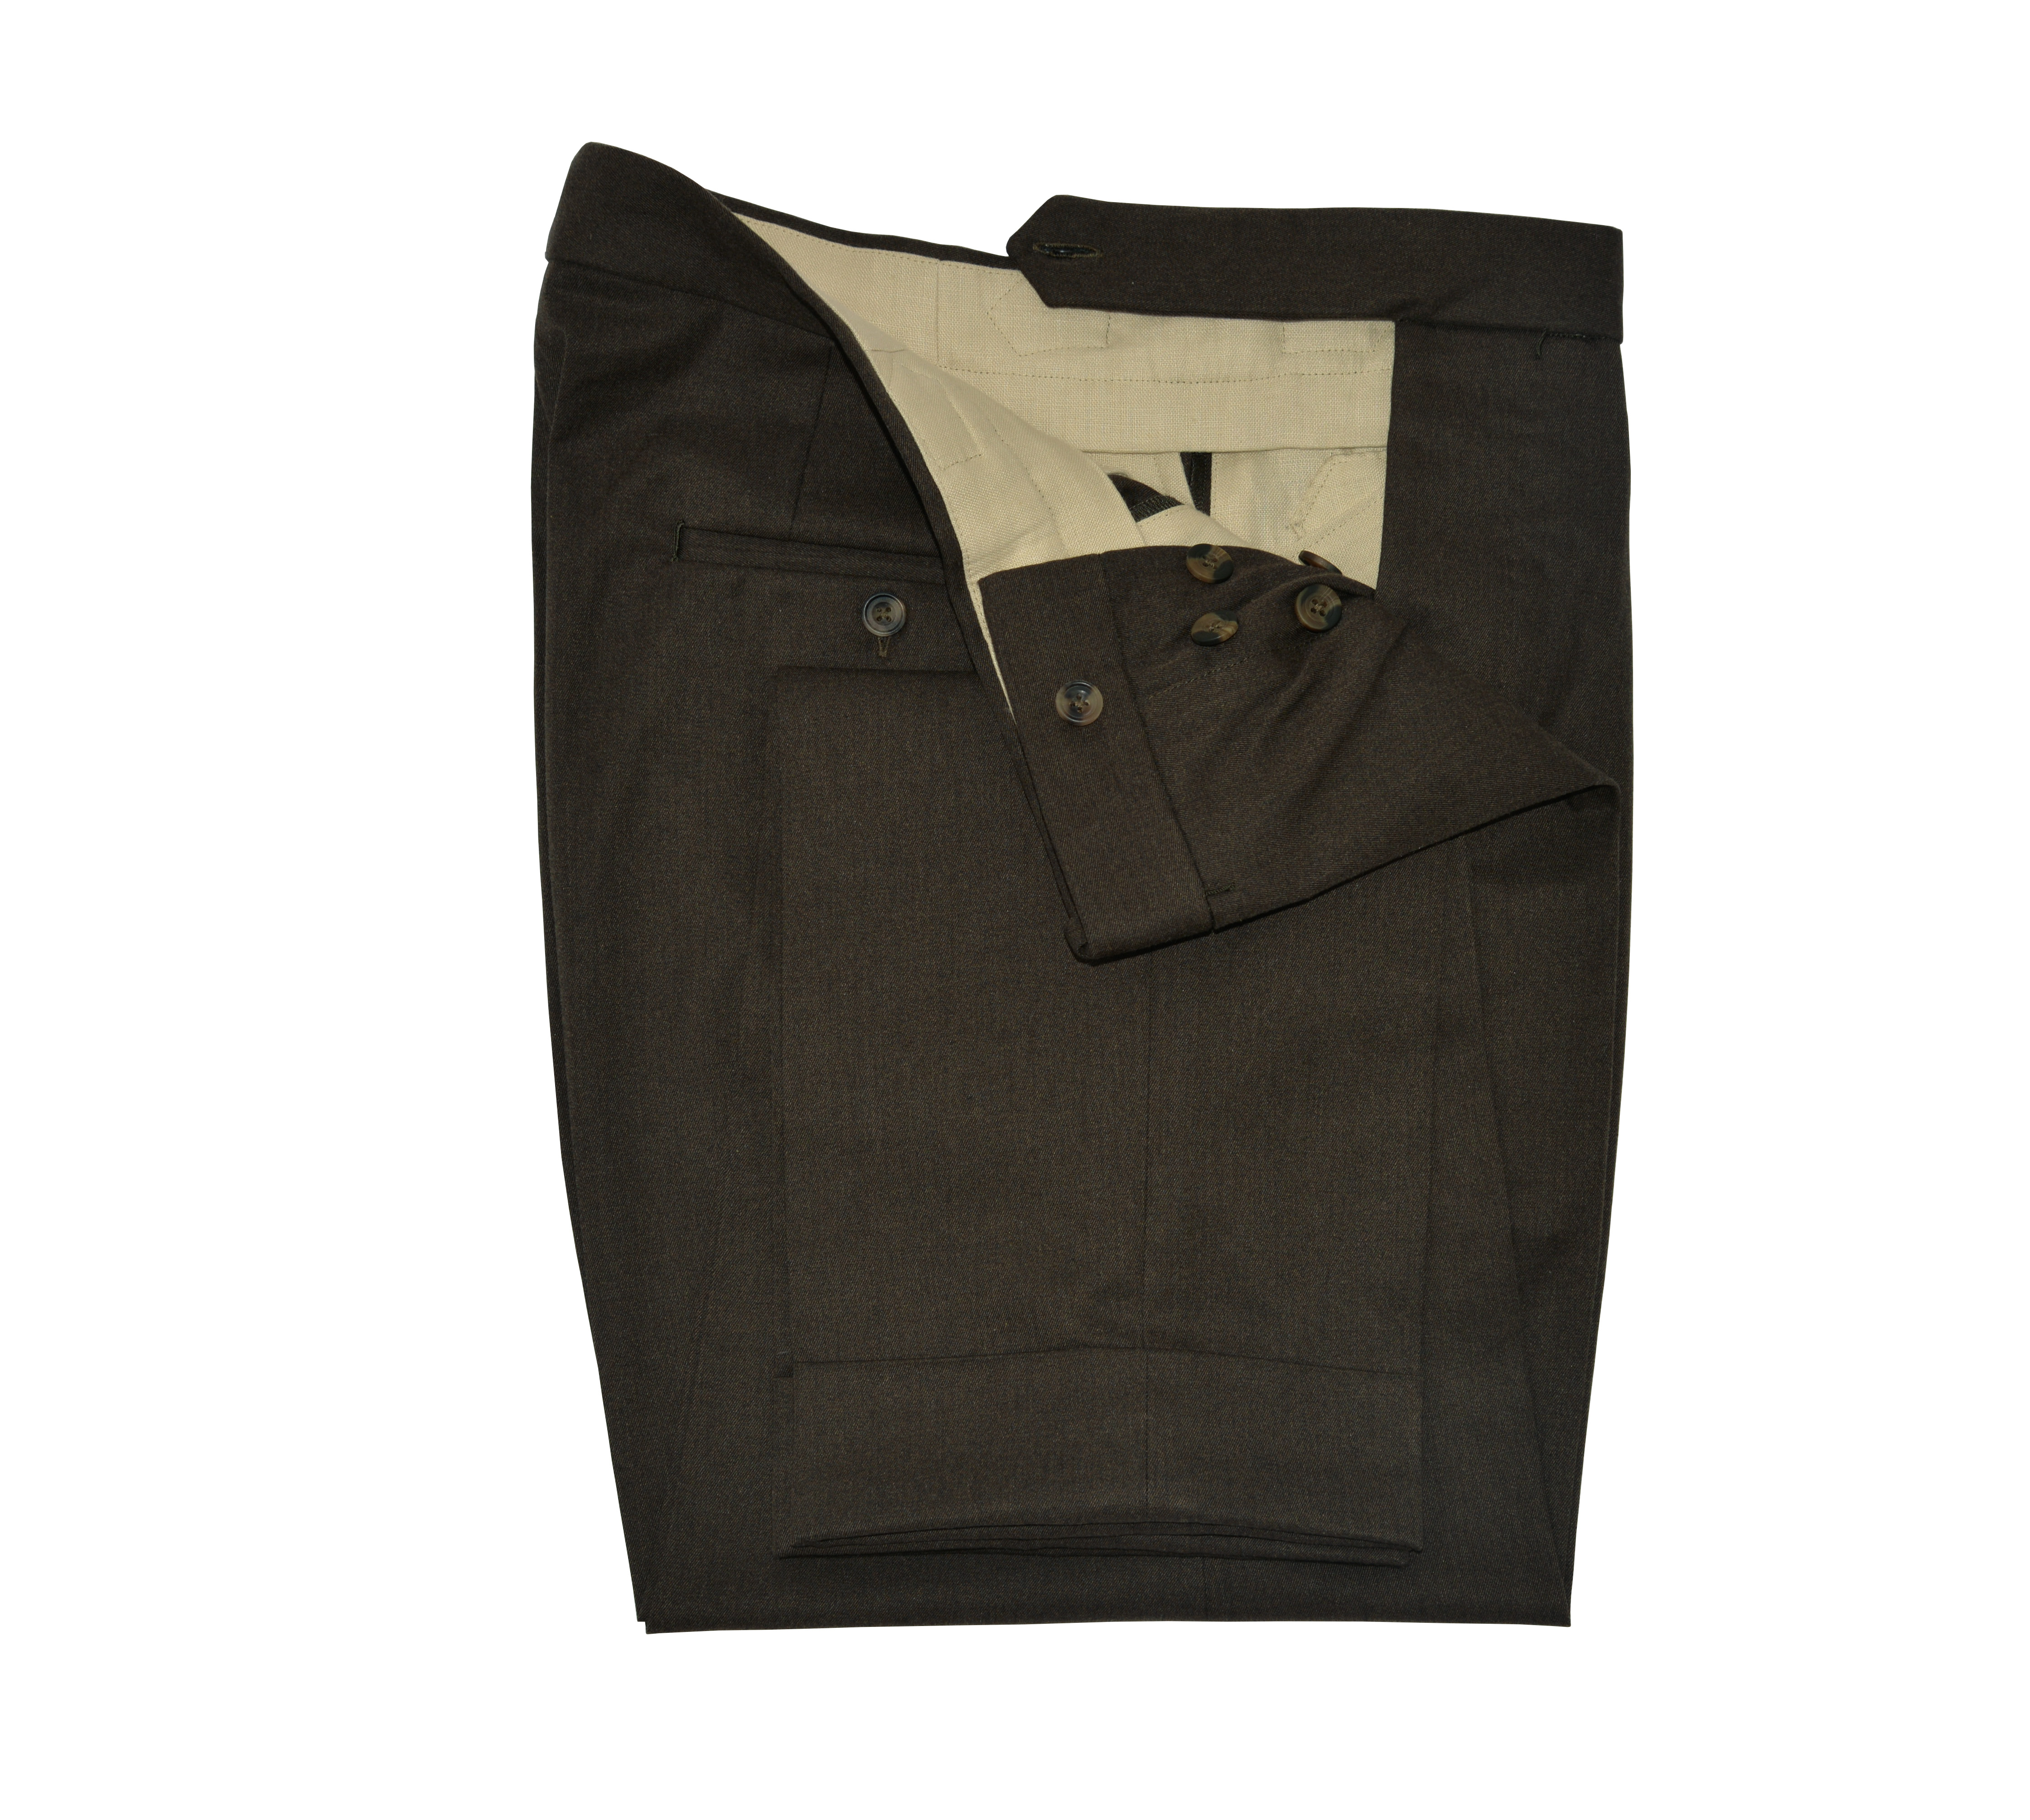 Button Fly.Pant made of Soft Brown Cotton Twill  Fabric.